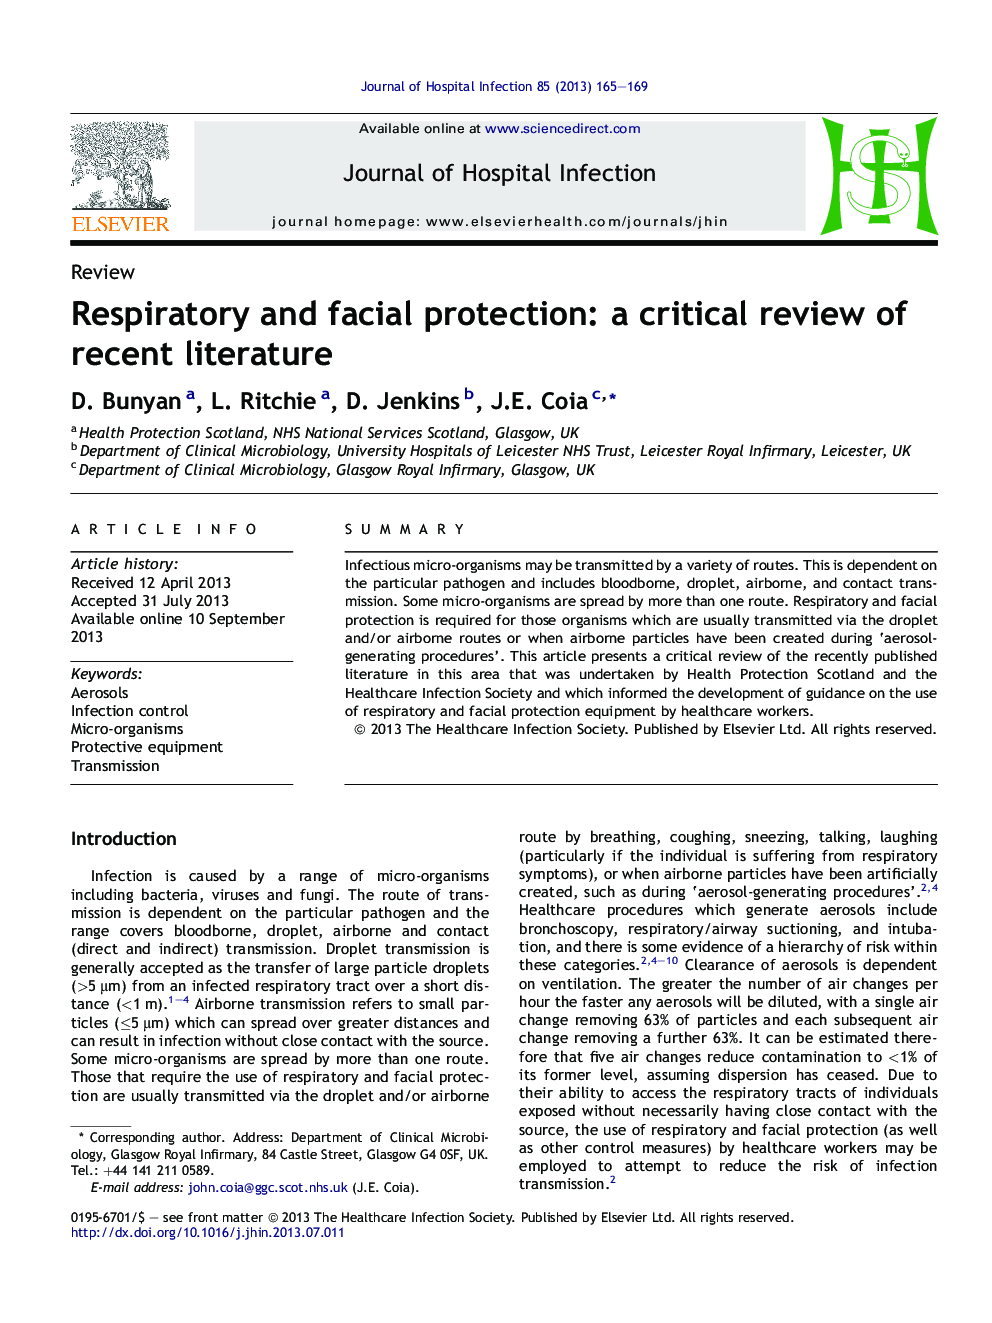 Respiratory and facial protection: a critical review of recent literature